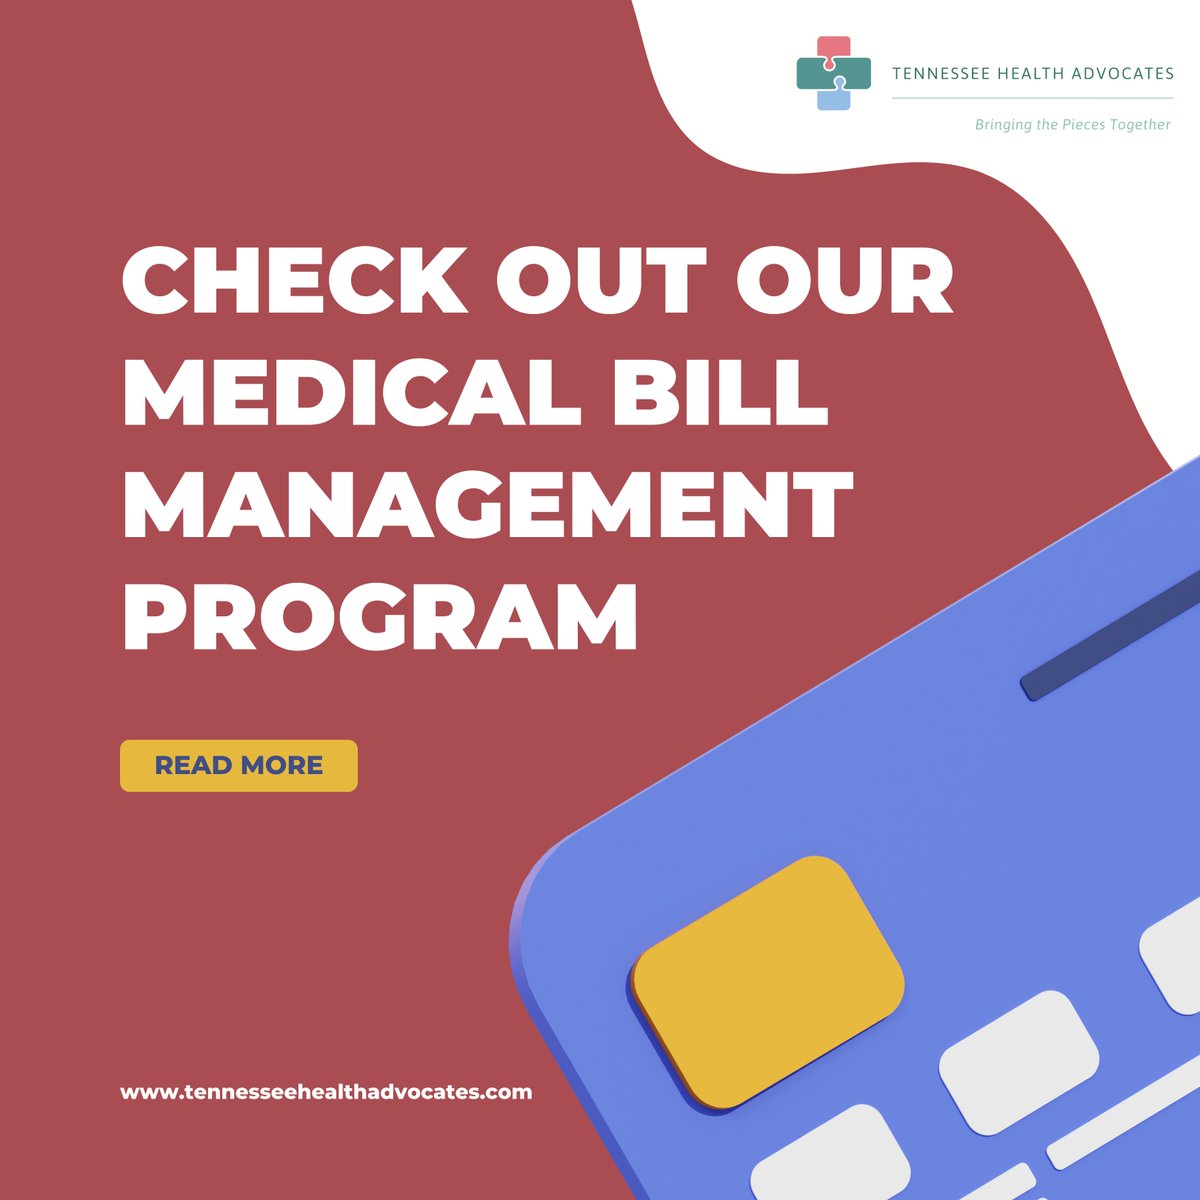 The Medical Bill Management Program takes care of all the details, so you don't have to worry about medical expenses. #tennesseehealthadvocates #medicalbills #healthinsurance #reviewyourbills #understandyourbills #reviewyourmedicalbills #peaceofmind #billingerrors #savetime